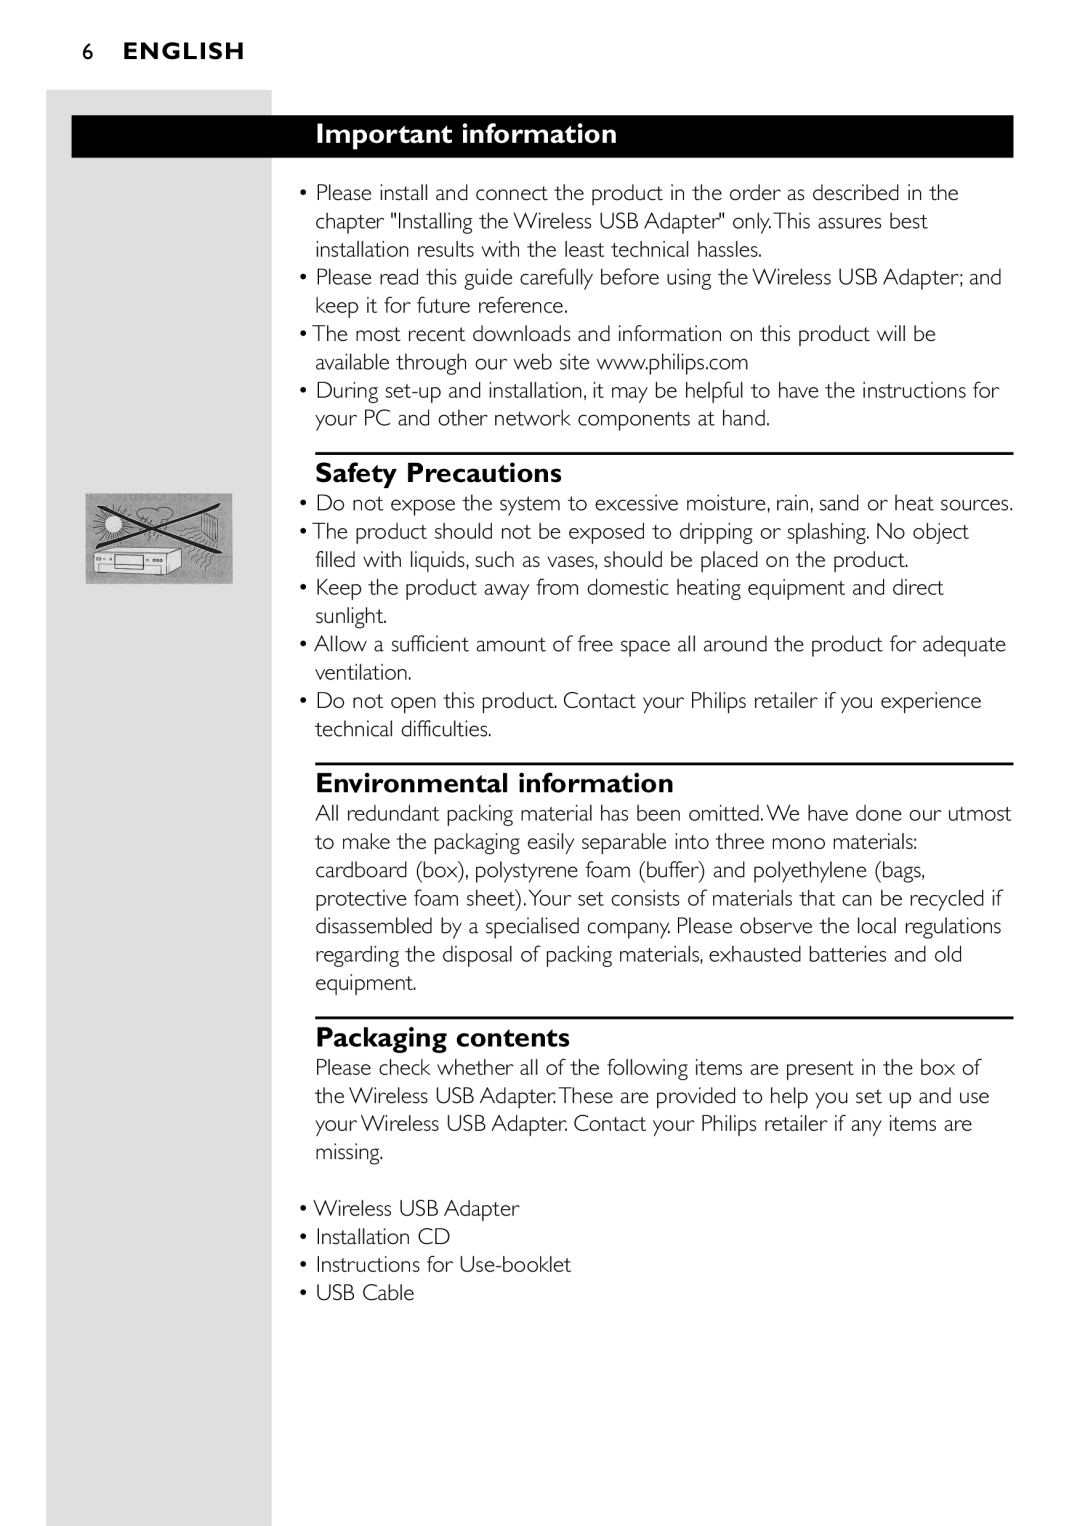 Philips CPWUA001 manual Important information, Safety Precautions, Environmental information, Packaging contents, English 